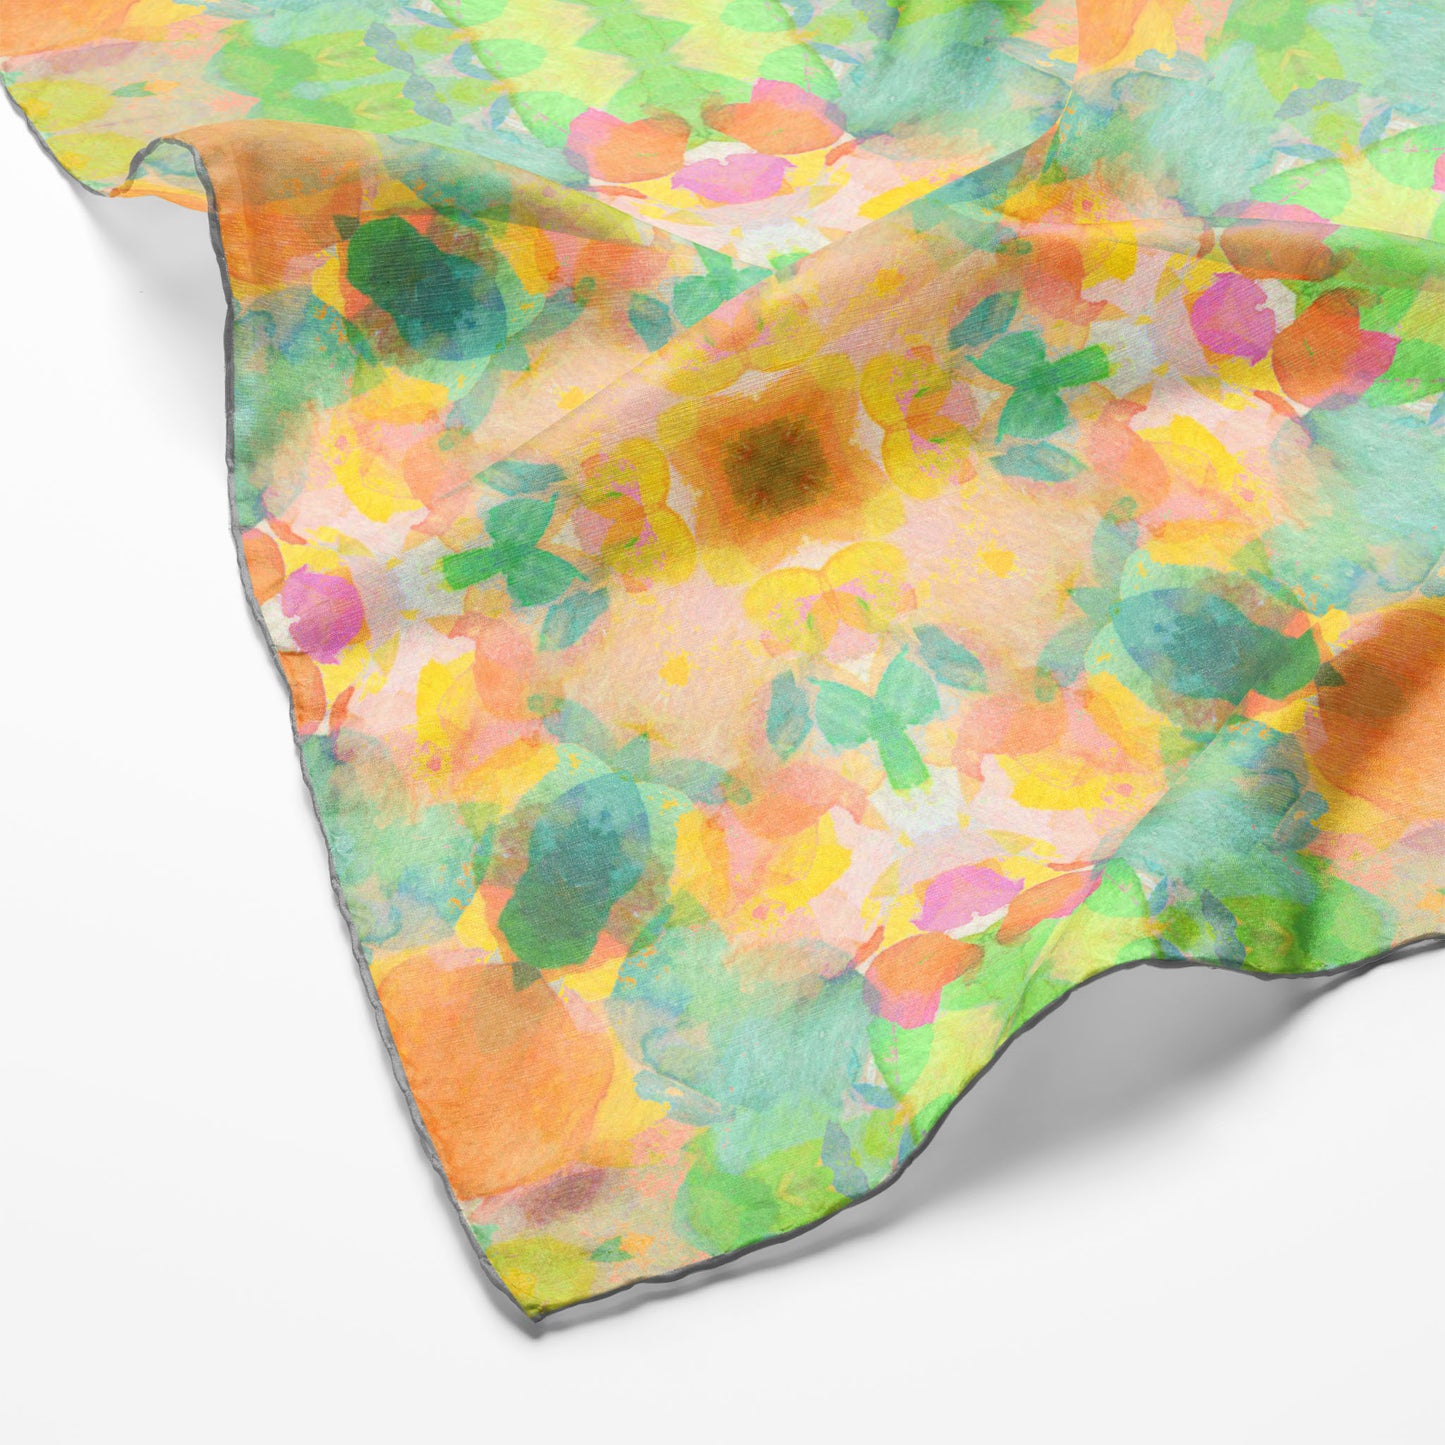 Silk scarf featuring an abstract peach and green hand-painted pattern